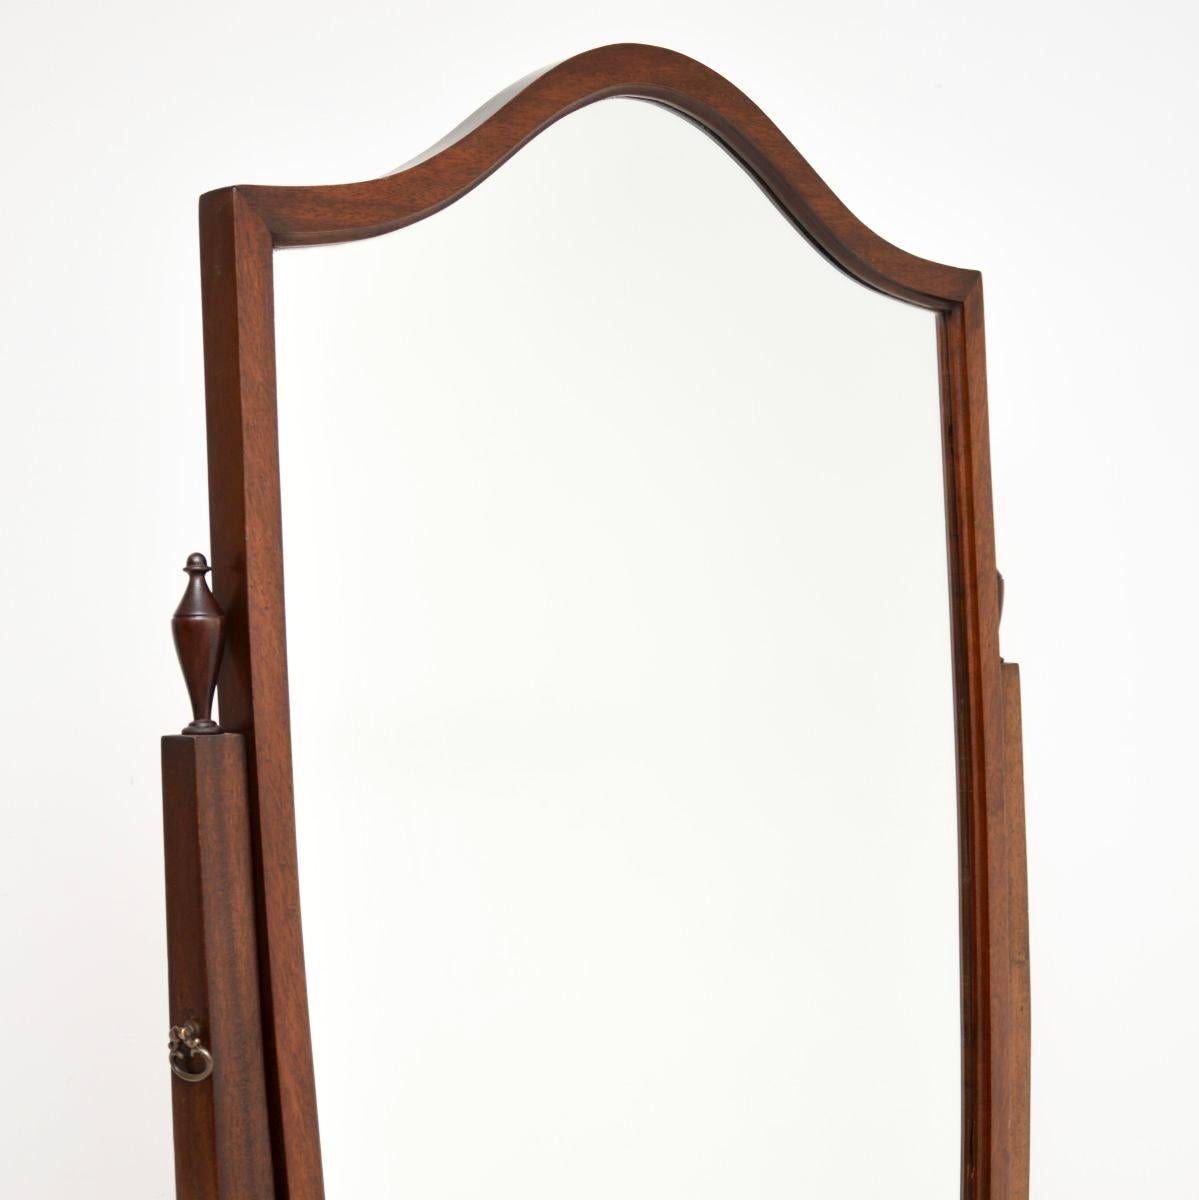 A large and very impressive antique Georgian style cheval mirror. This was made in England, it dates from around the 1950’s.

It is of outstanding quality with a fantastic design. The large mirror frame is shield shaped, the supports are beautifully